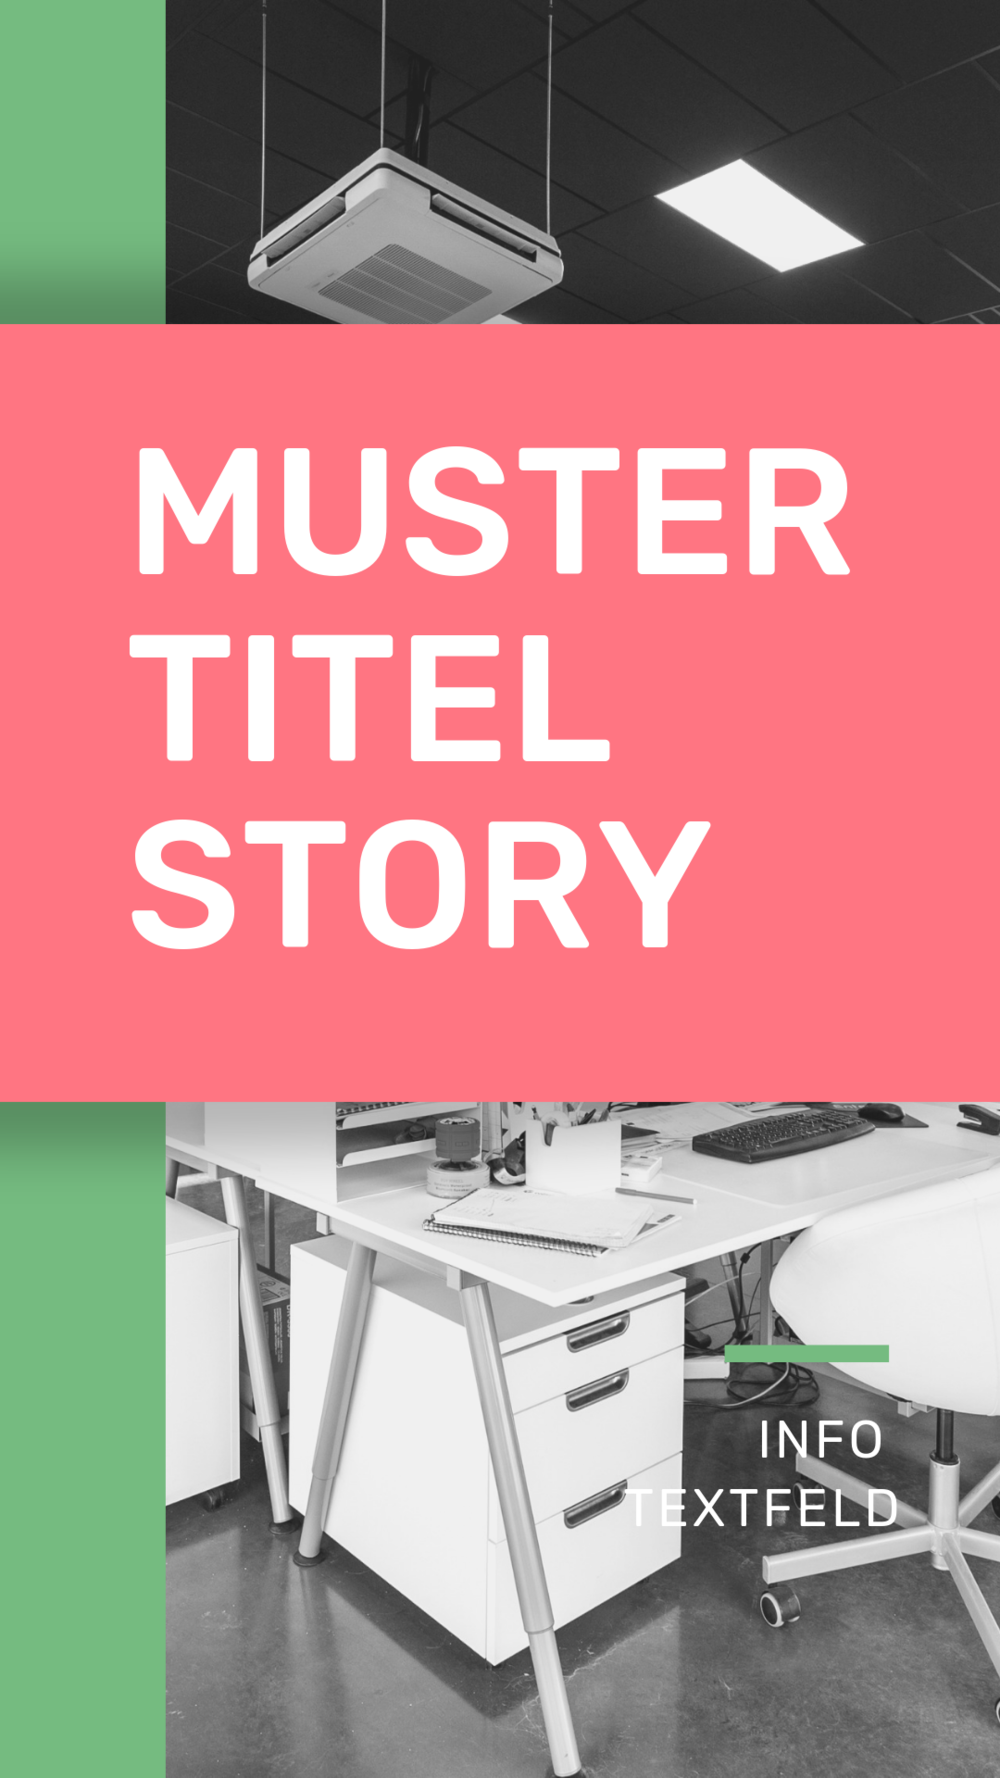 Muster Titel Story anzeige.PNG